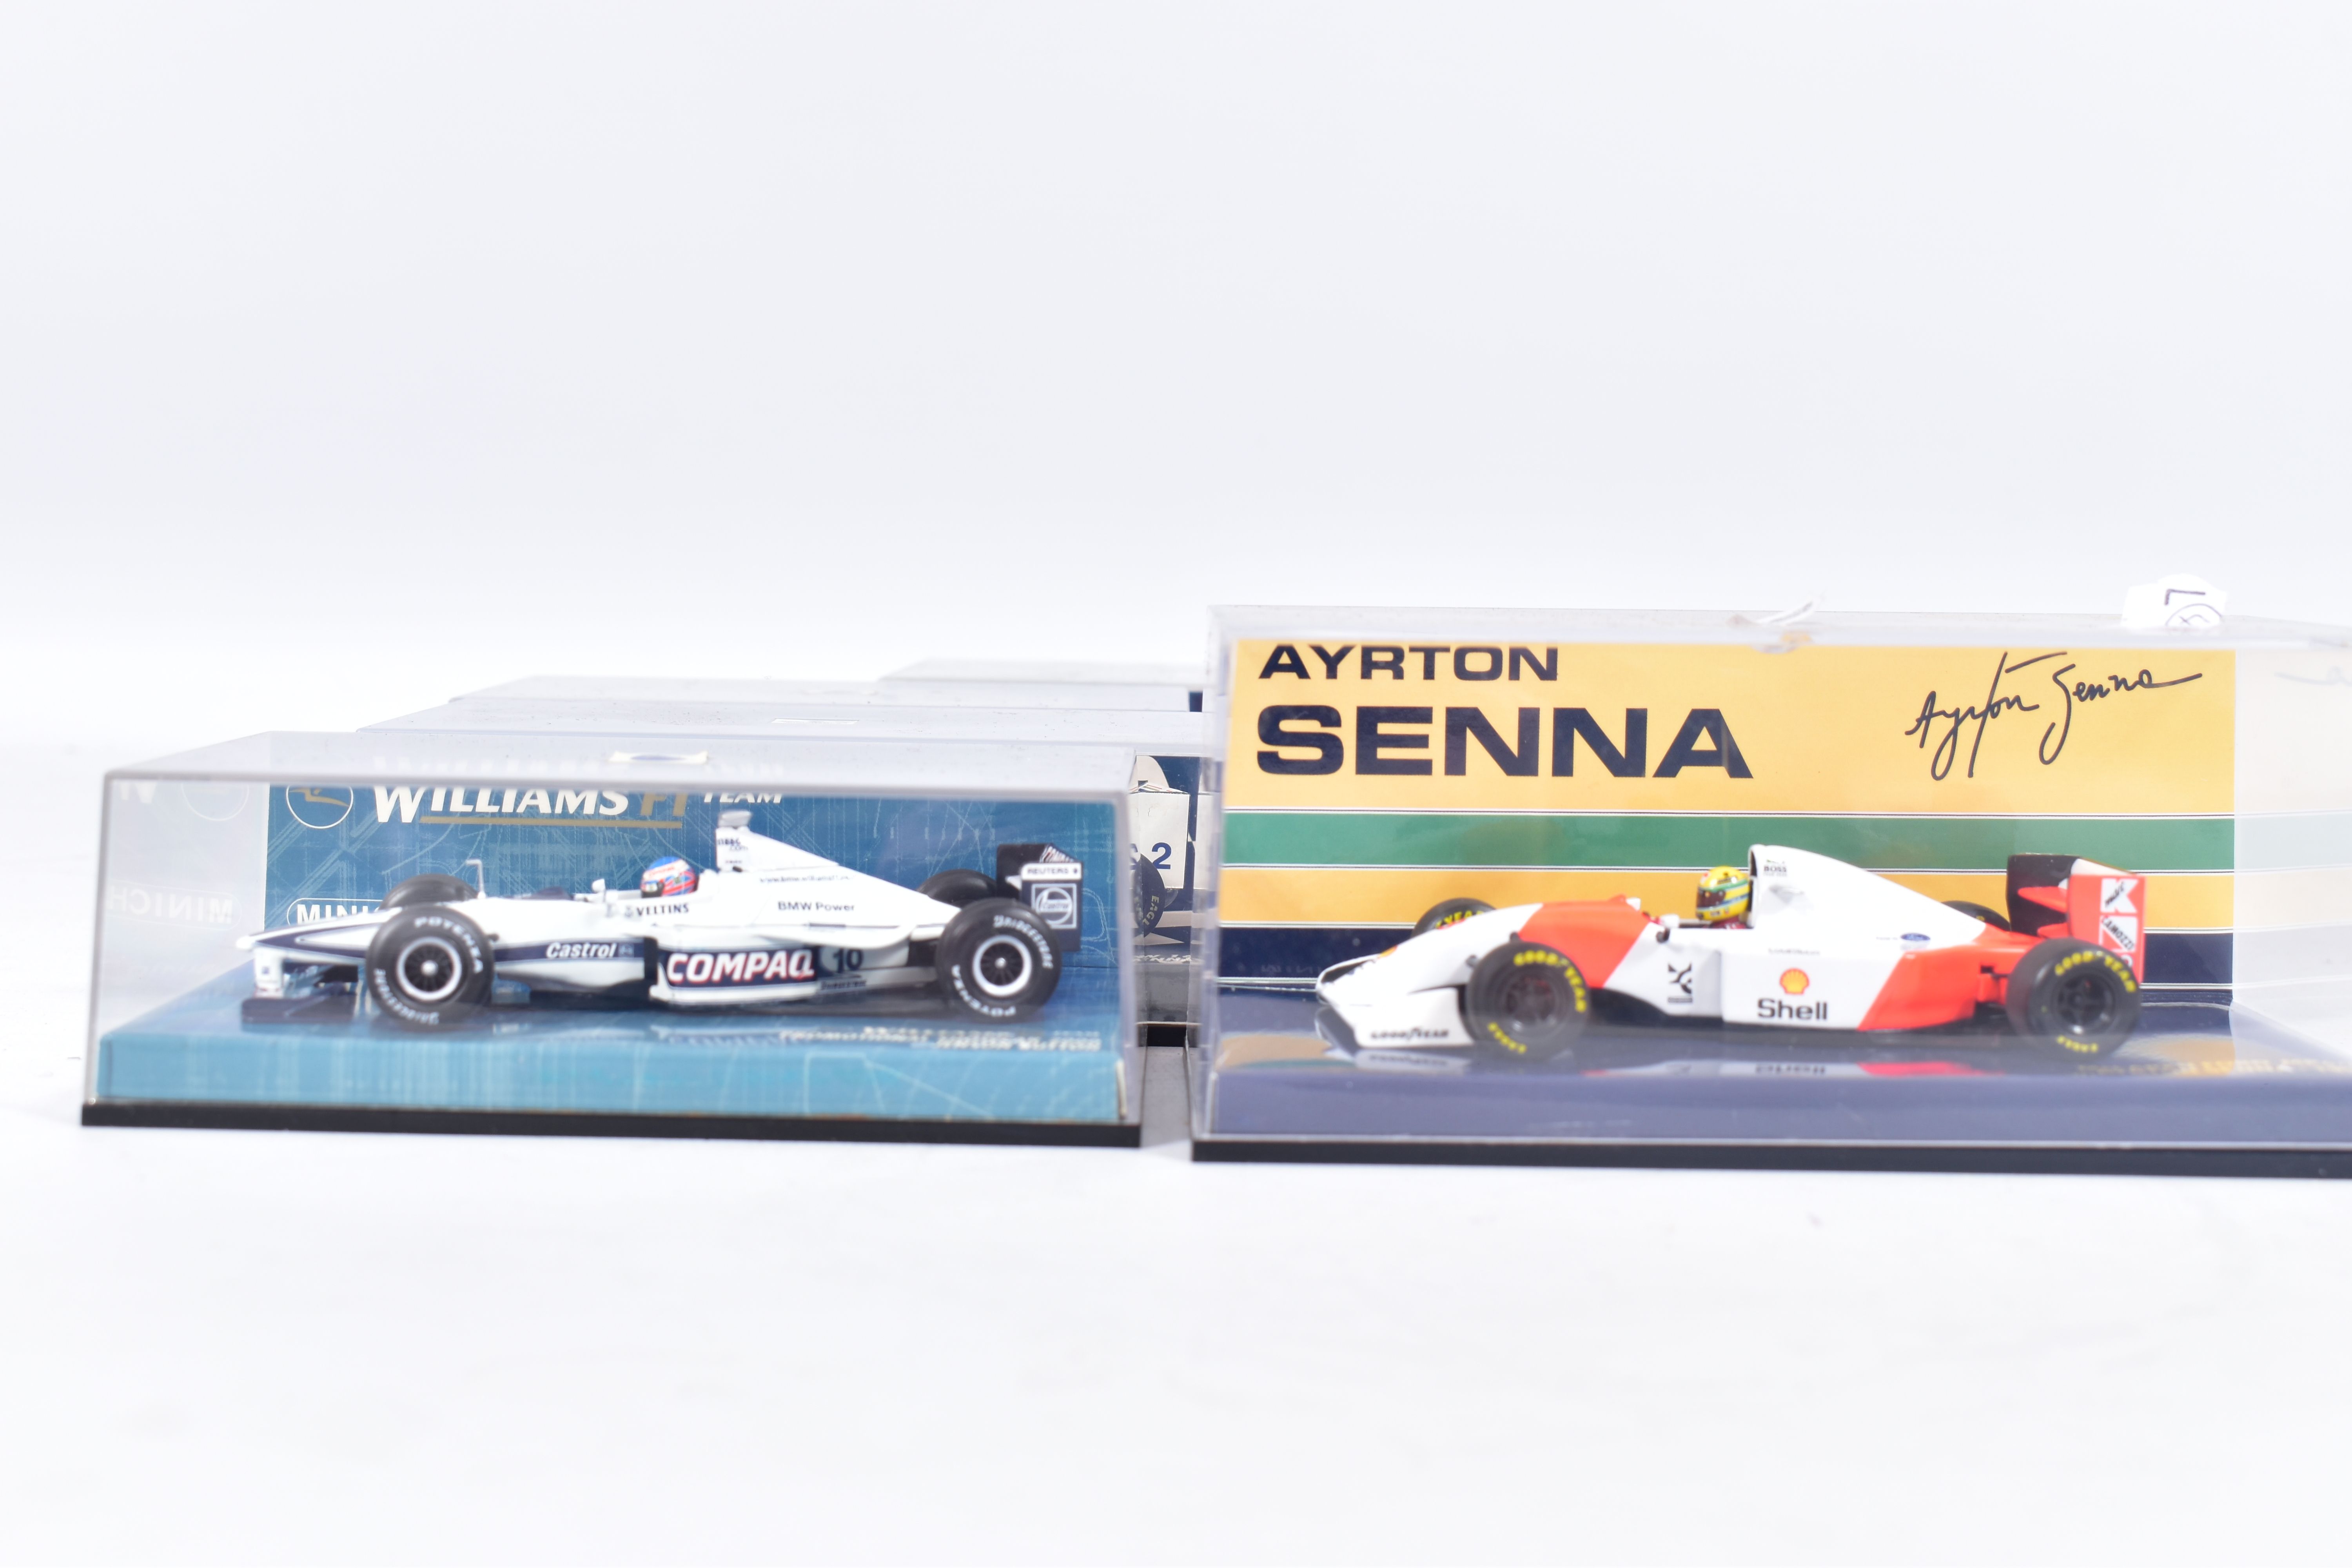 NINE BOXED ASSORTED PAUL'S MODEL ART MINICHAMPS 1:43 SCALE DIECAST F1 RACING CAR MODELS, all are - Image 3 of 6